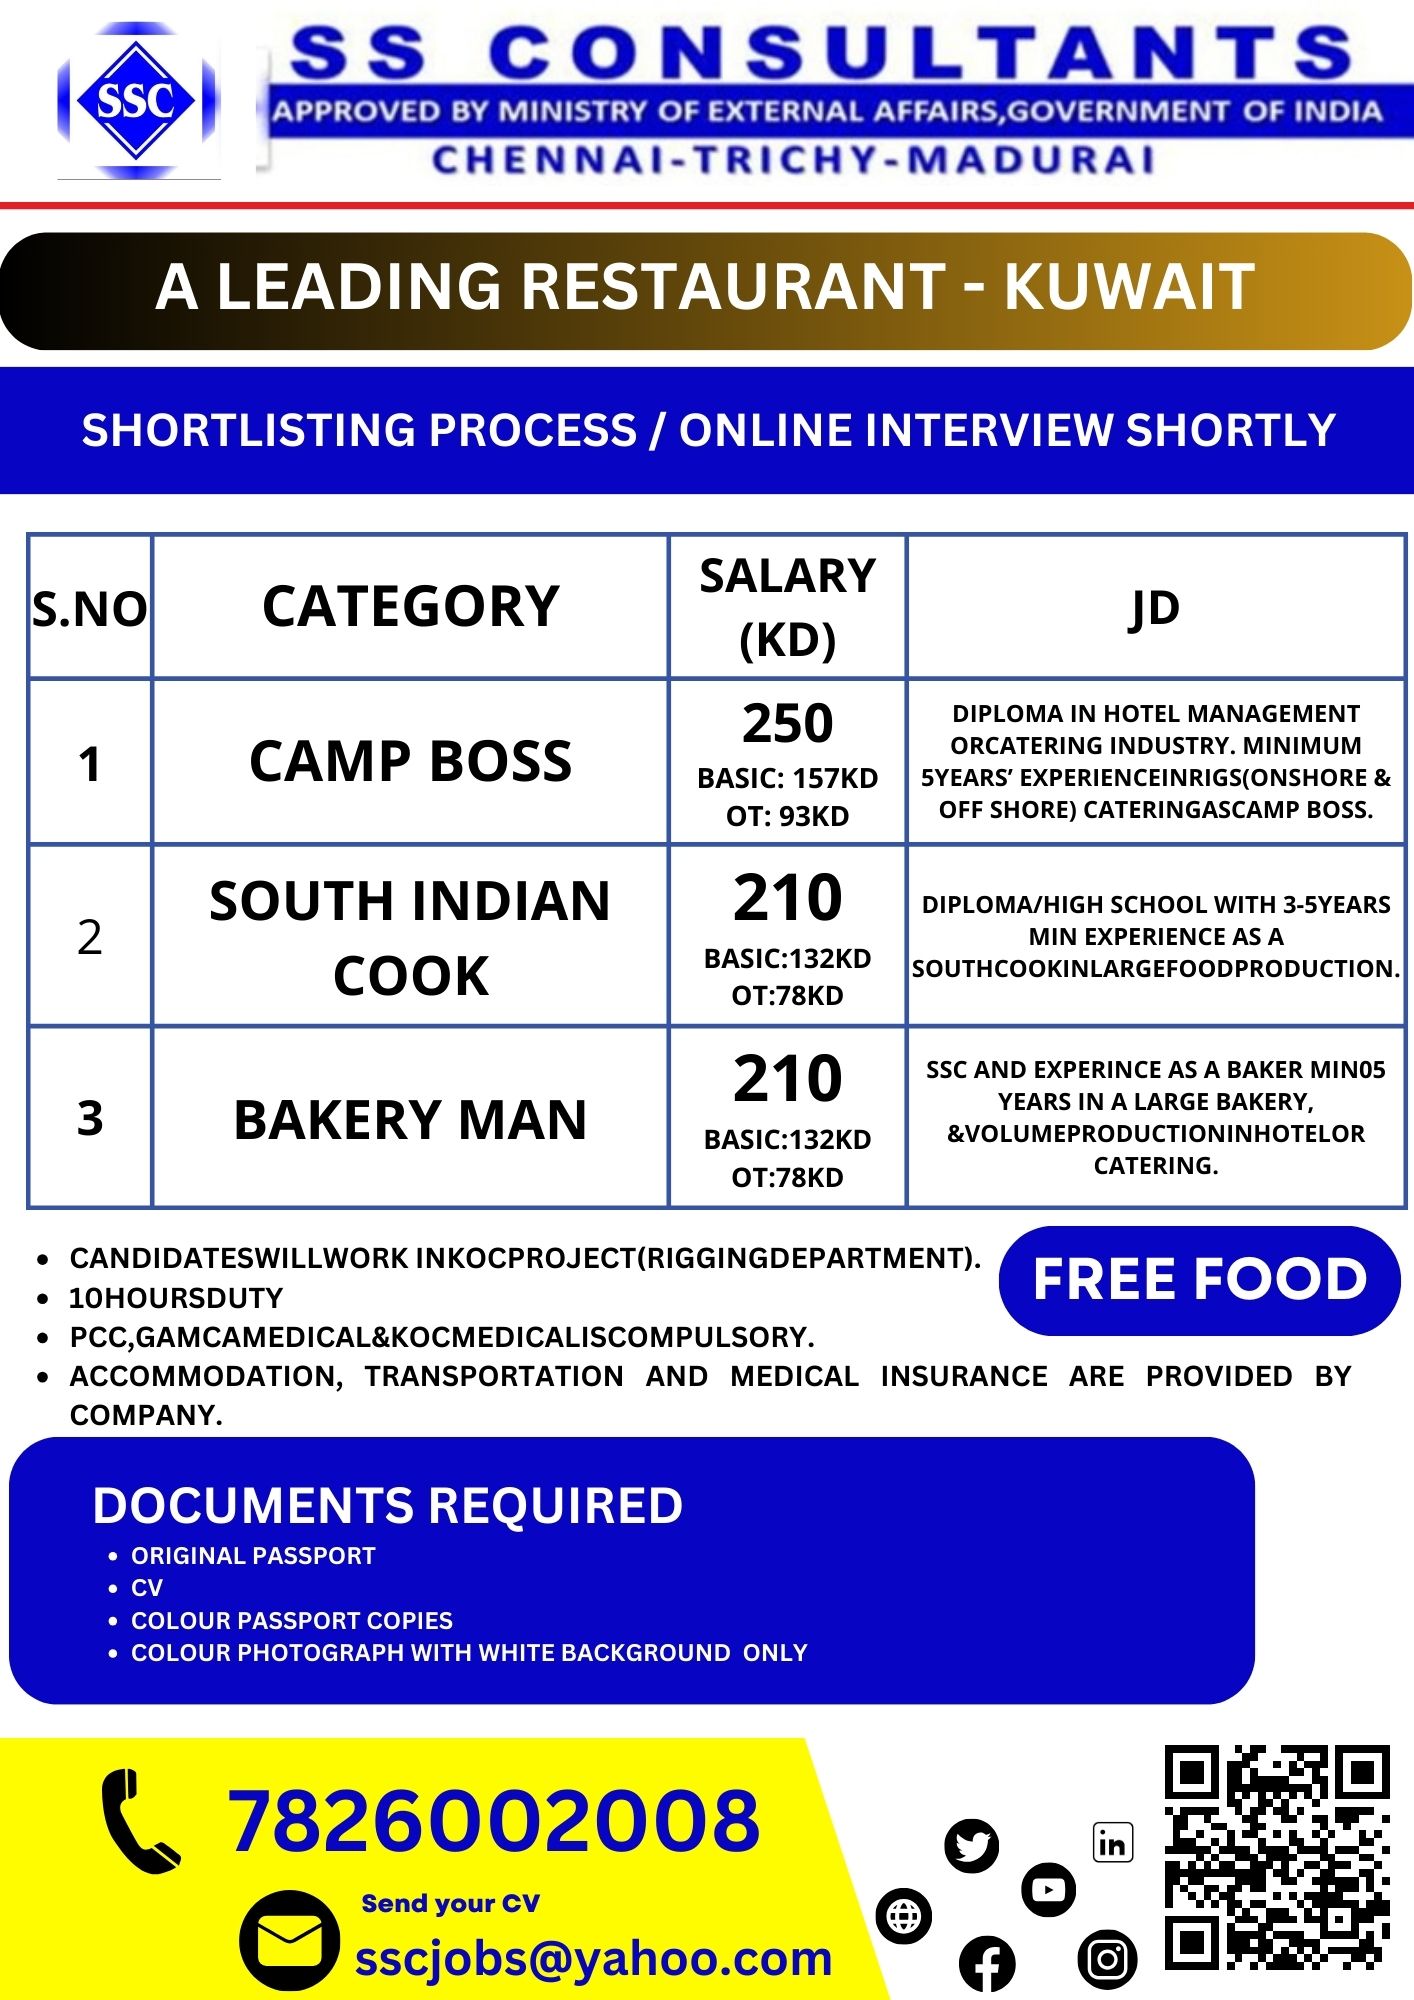 CAMP BOSS , SOUTH INDIAN COOK , BAKERY MAN| A Leading Restaurant – Kuwait